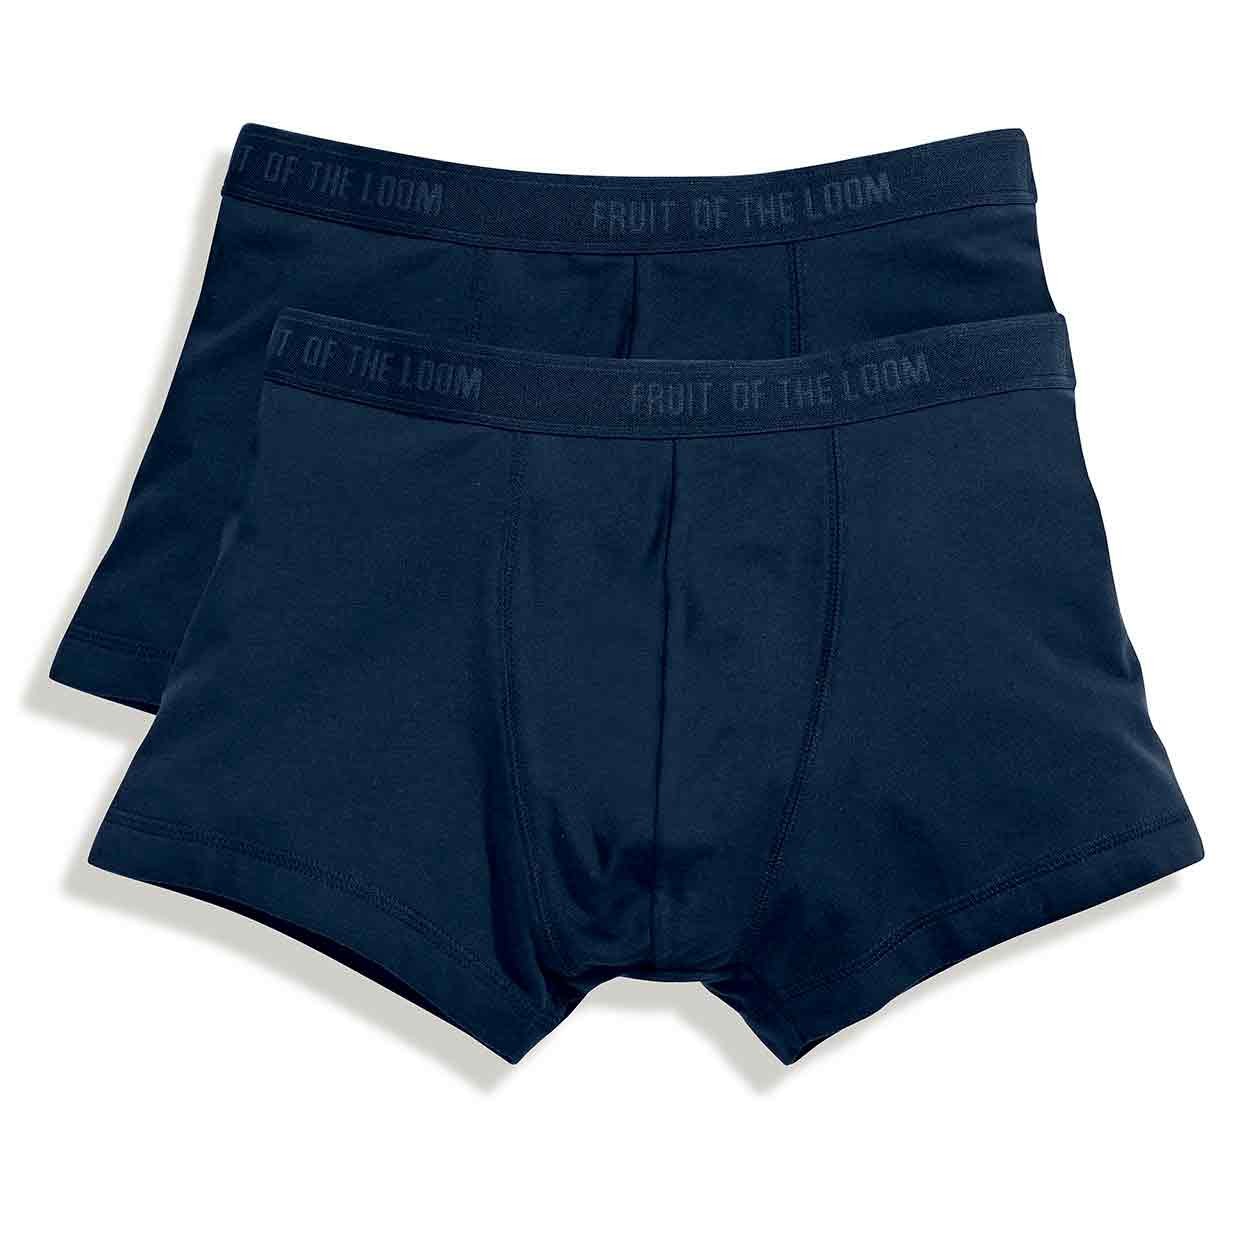 Fruit of the Loom SS303 Classsic Shorty Boxer - Underwear